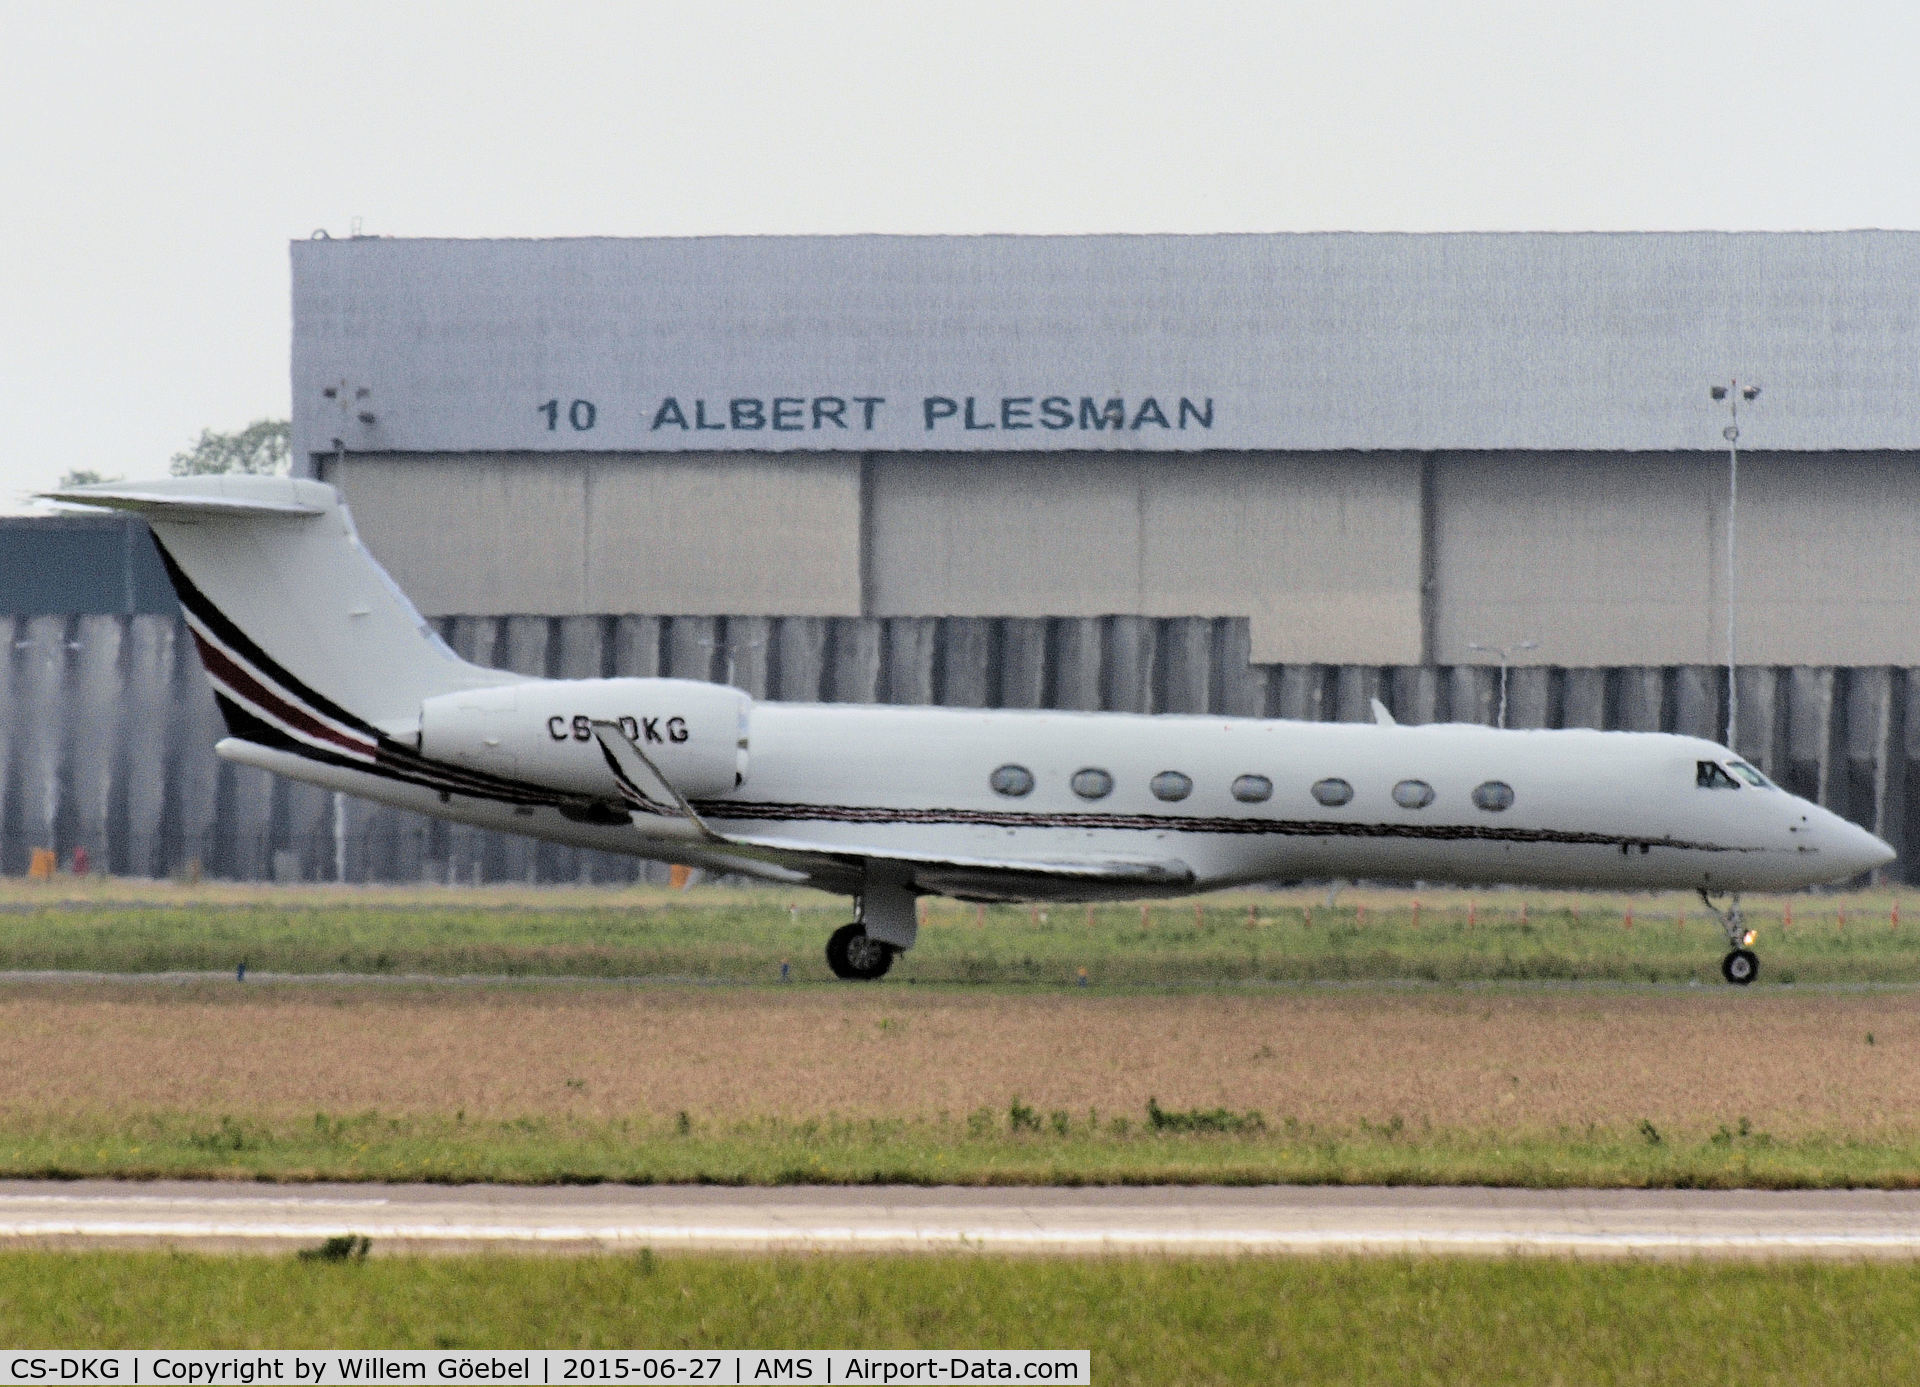 CS-DKG, 2007 Gulfstream Aerospace GV-SP (G550) C/N 5127, Take off from runway 22 of Schiphol Airport